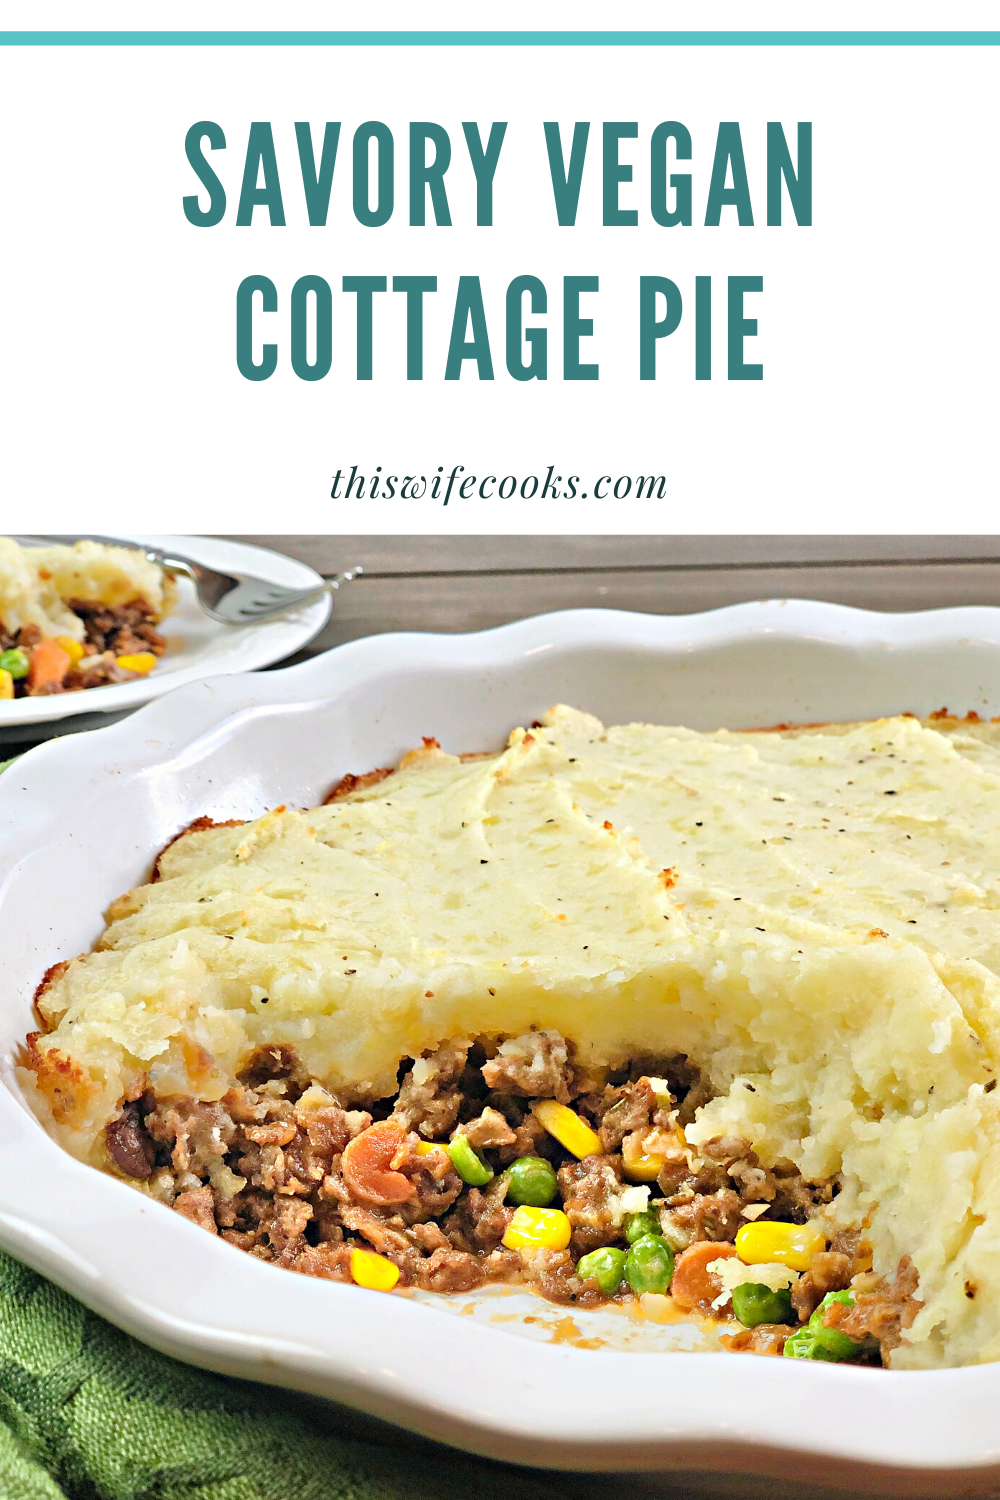 Vegan Cottage Pie - This plant-based version of a classic cottage pie is pure comfort food! via @thiswifecooks